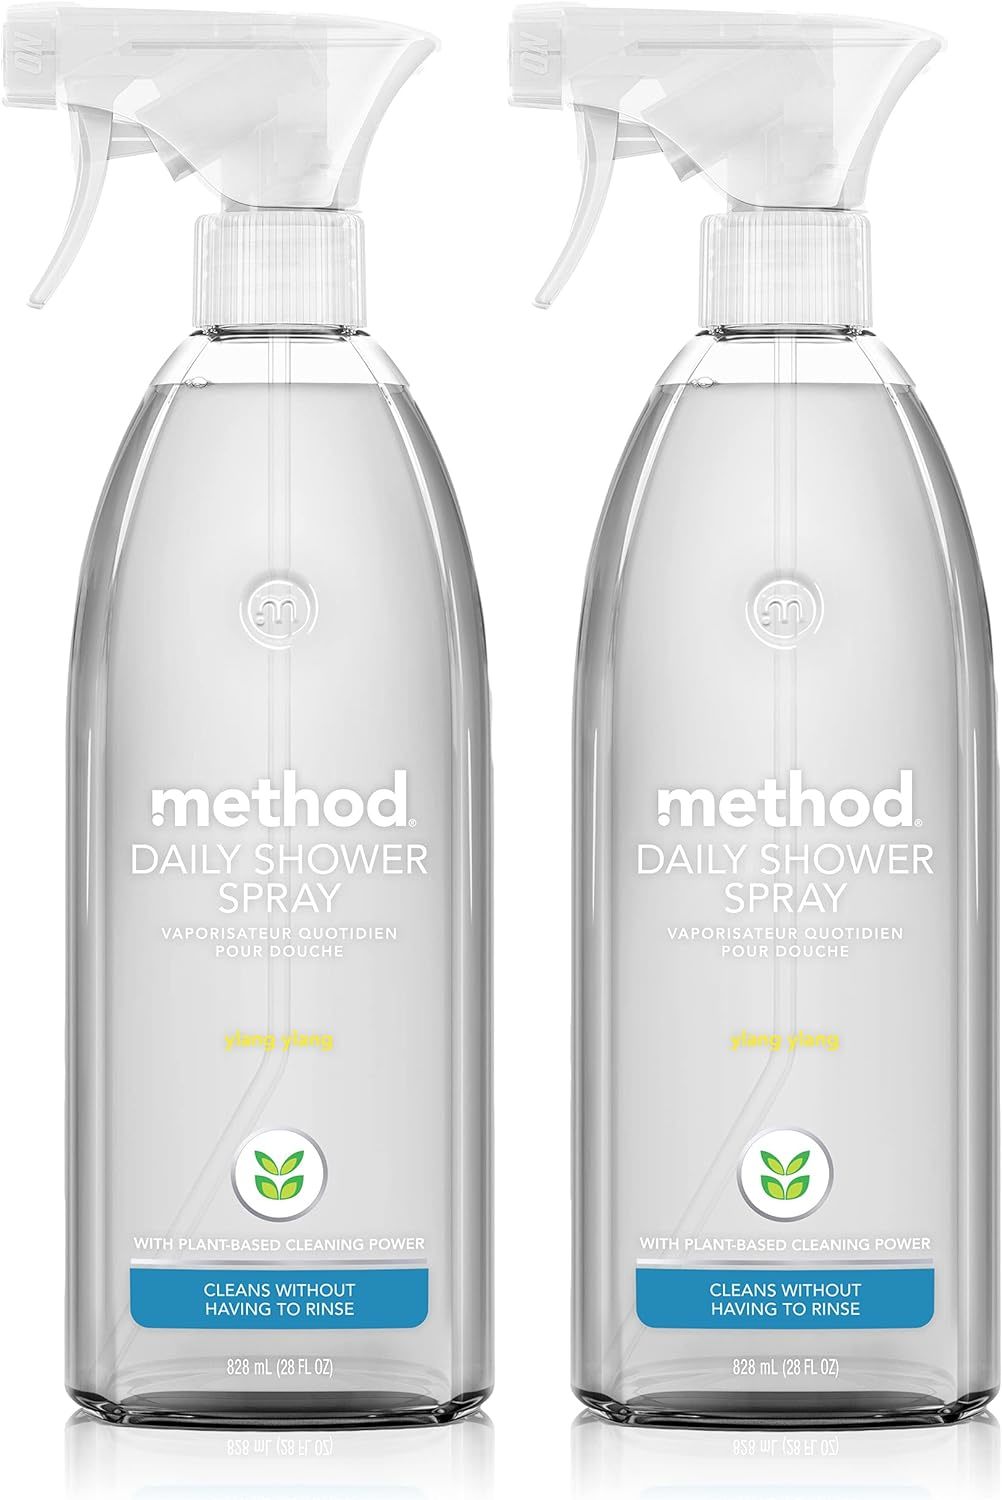 Method Daily Shower Cleaner Spray, Ylang Ylang, For Showers, Tile, Fixtures, Gla - $45.99